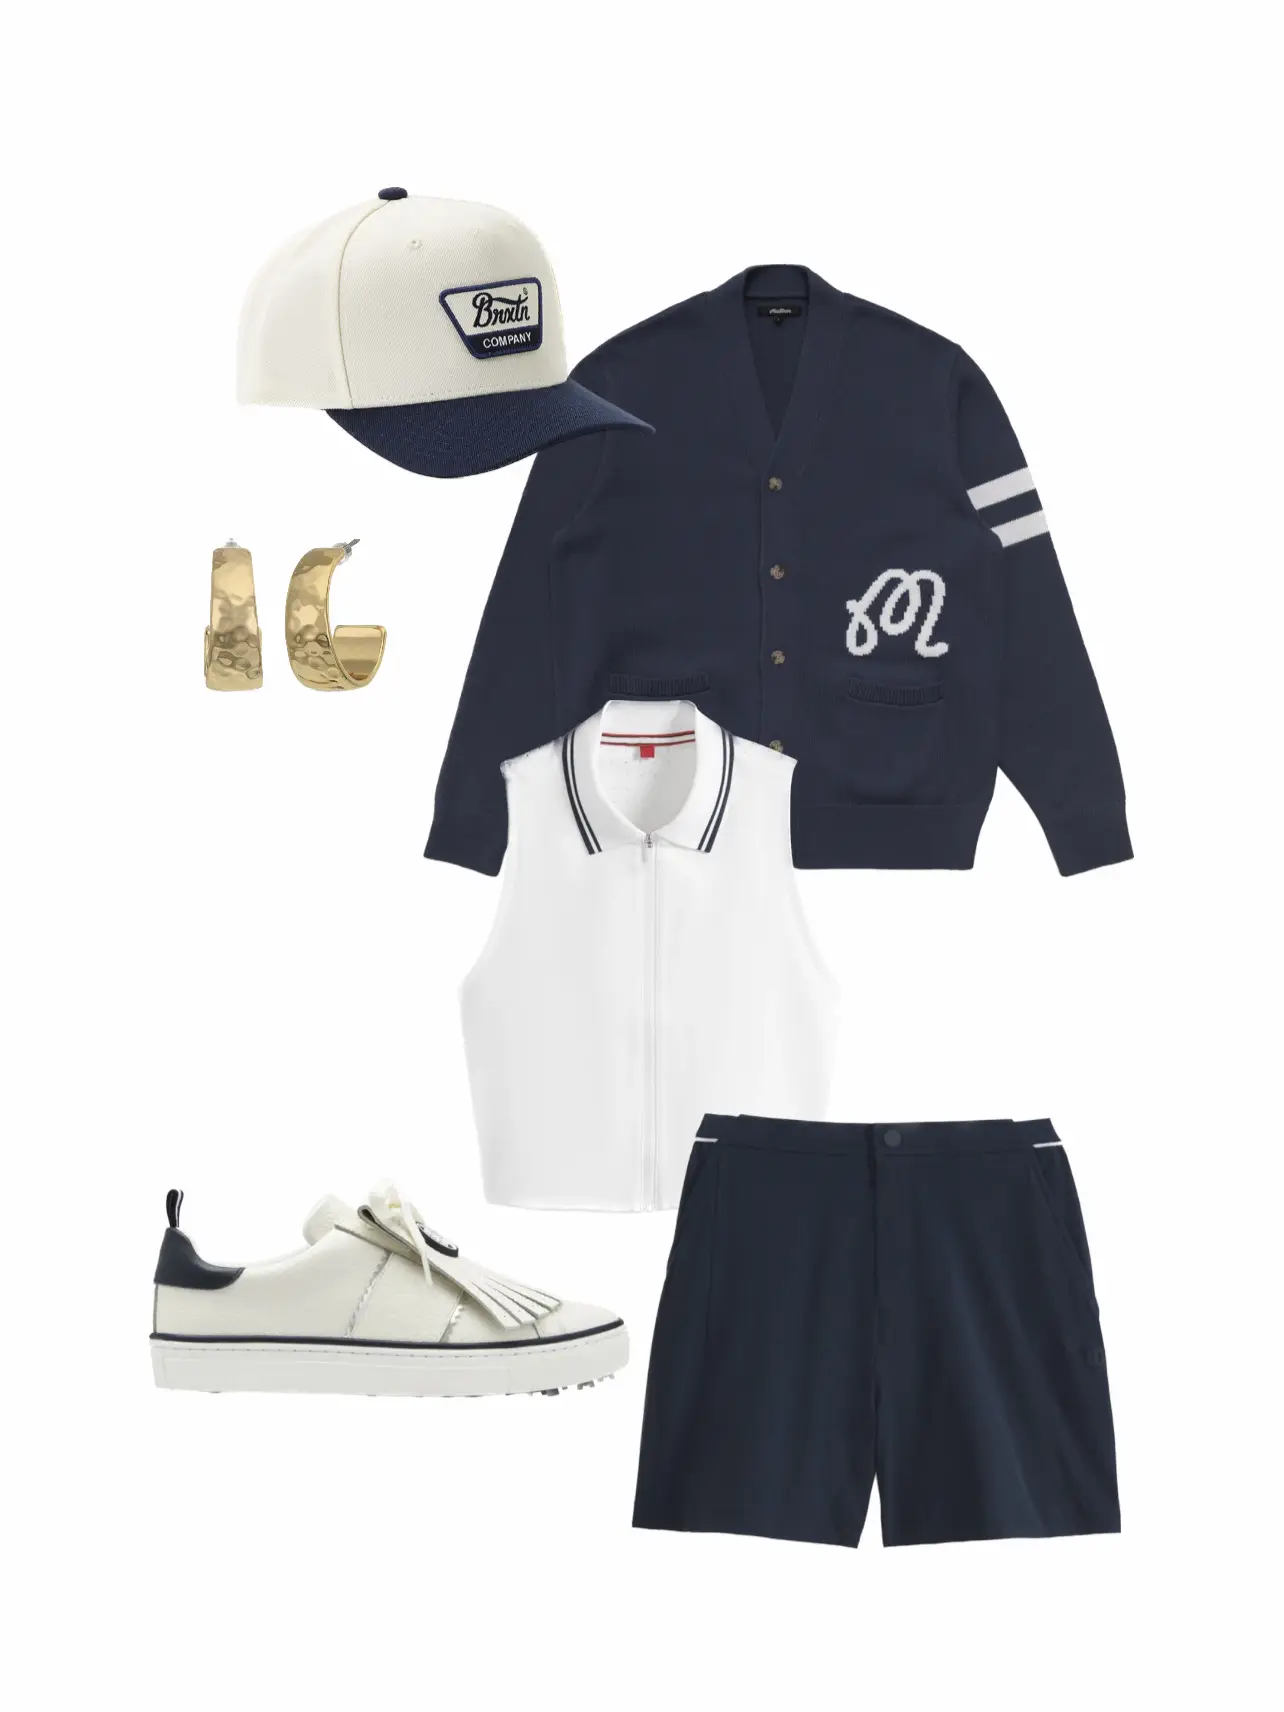 casual golf outfit with leggings - Lemon8 Search